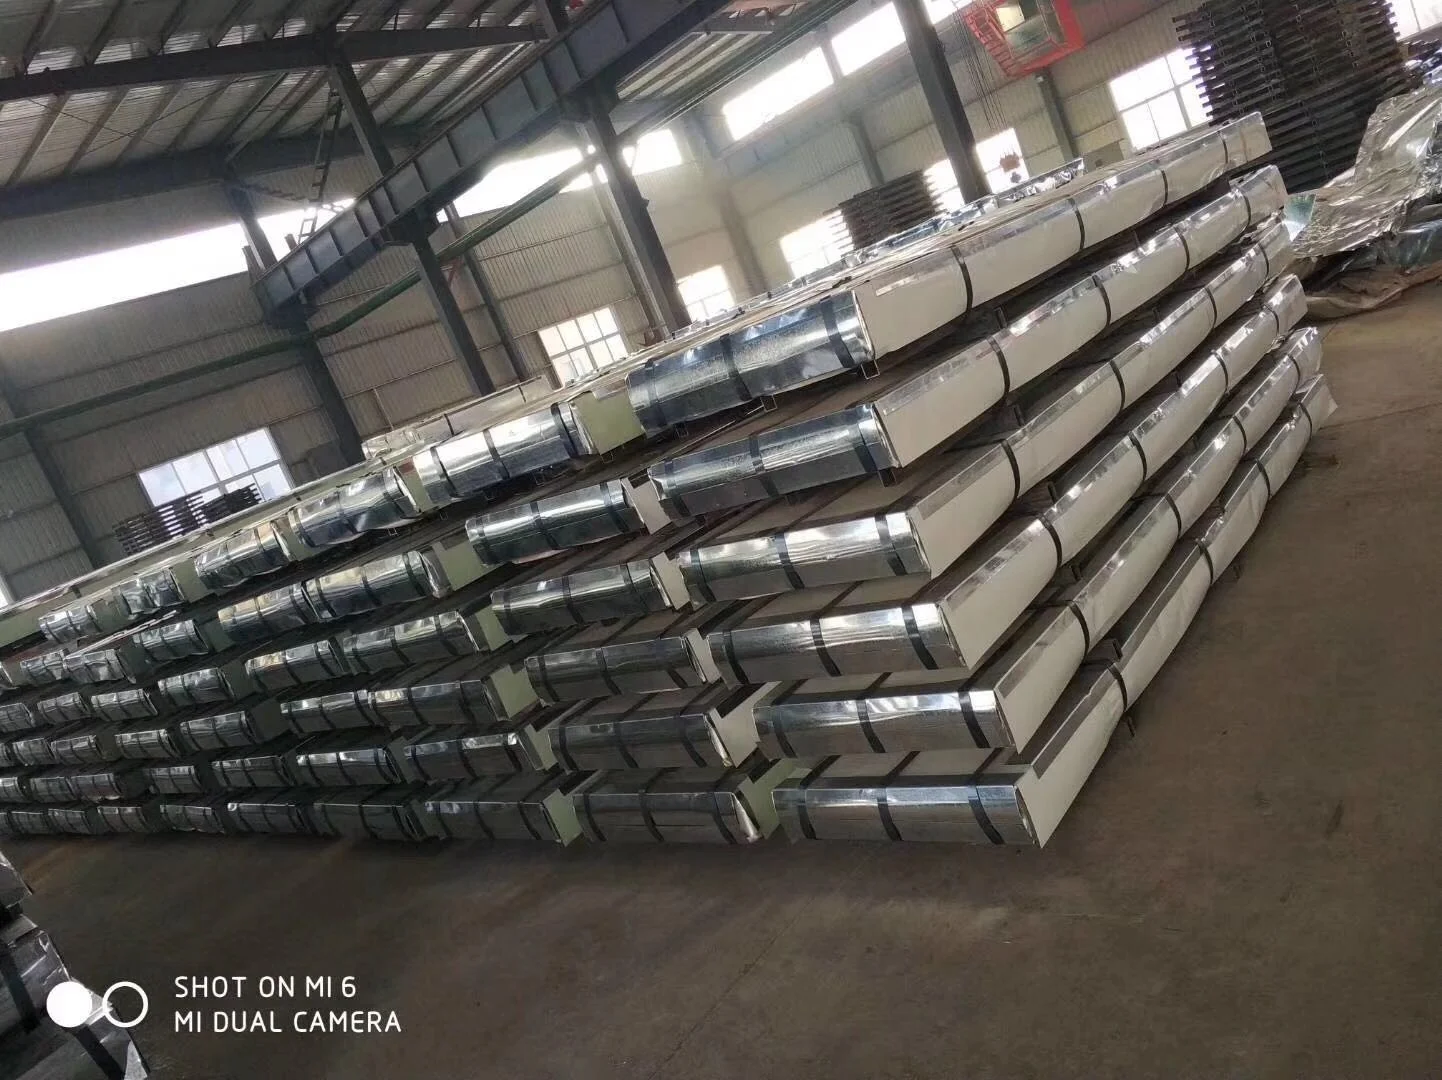 Building Materials Galvanized Corrugated Metal Roof Panels For Ceilings And Walls